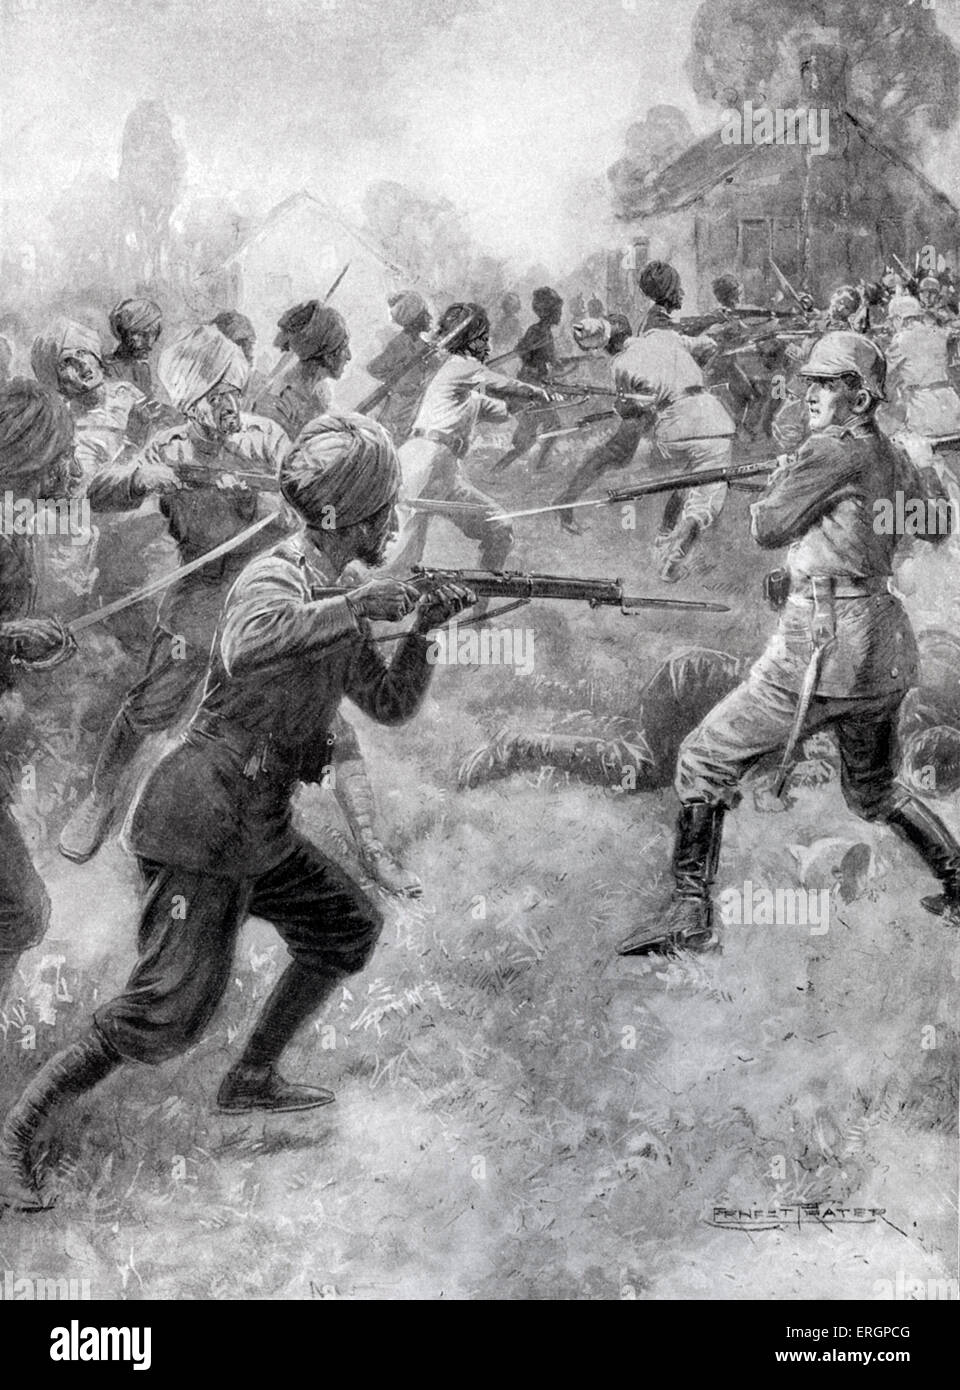 British Indian army, the 58th Vaughan's Rifles (Frontier Force) attack German soldiers with bayonets. Stock Photo